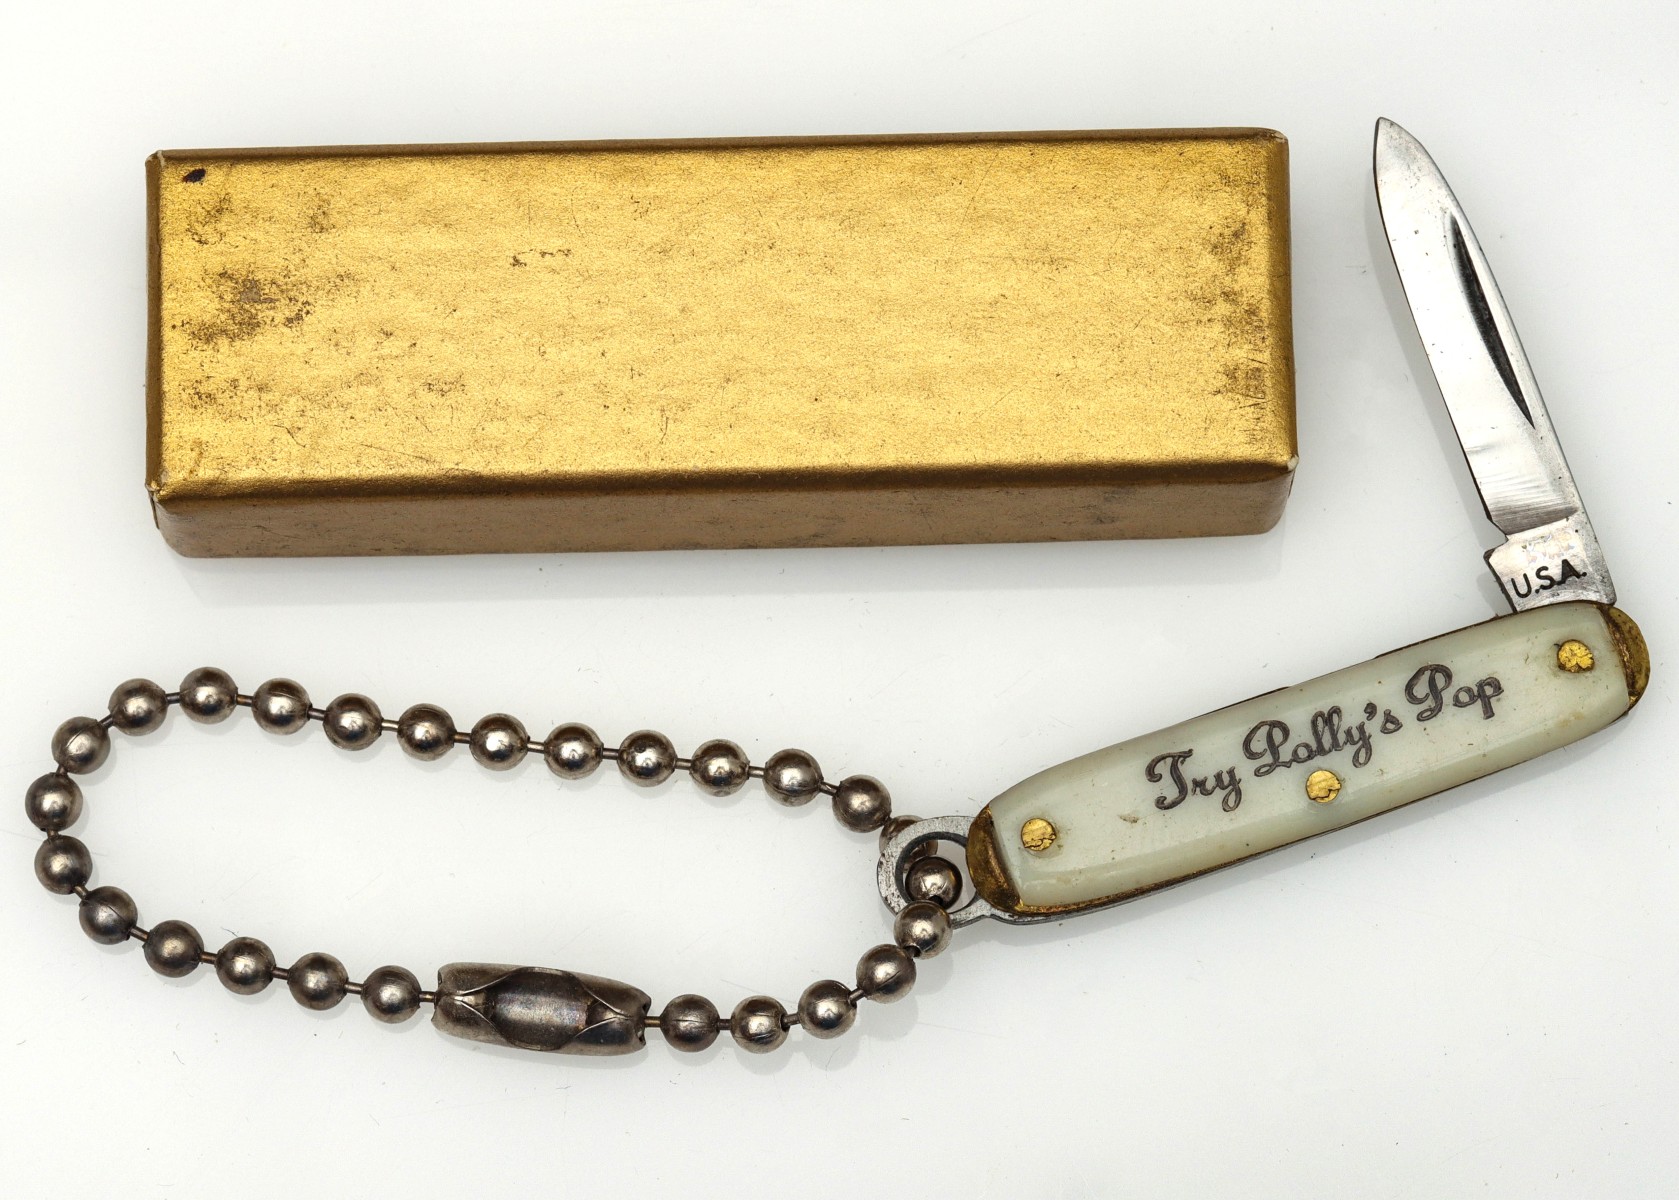 A POLLY'S POP/COUNTRY CLUB BEER KNIFE IN ORIGINAL BOX